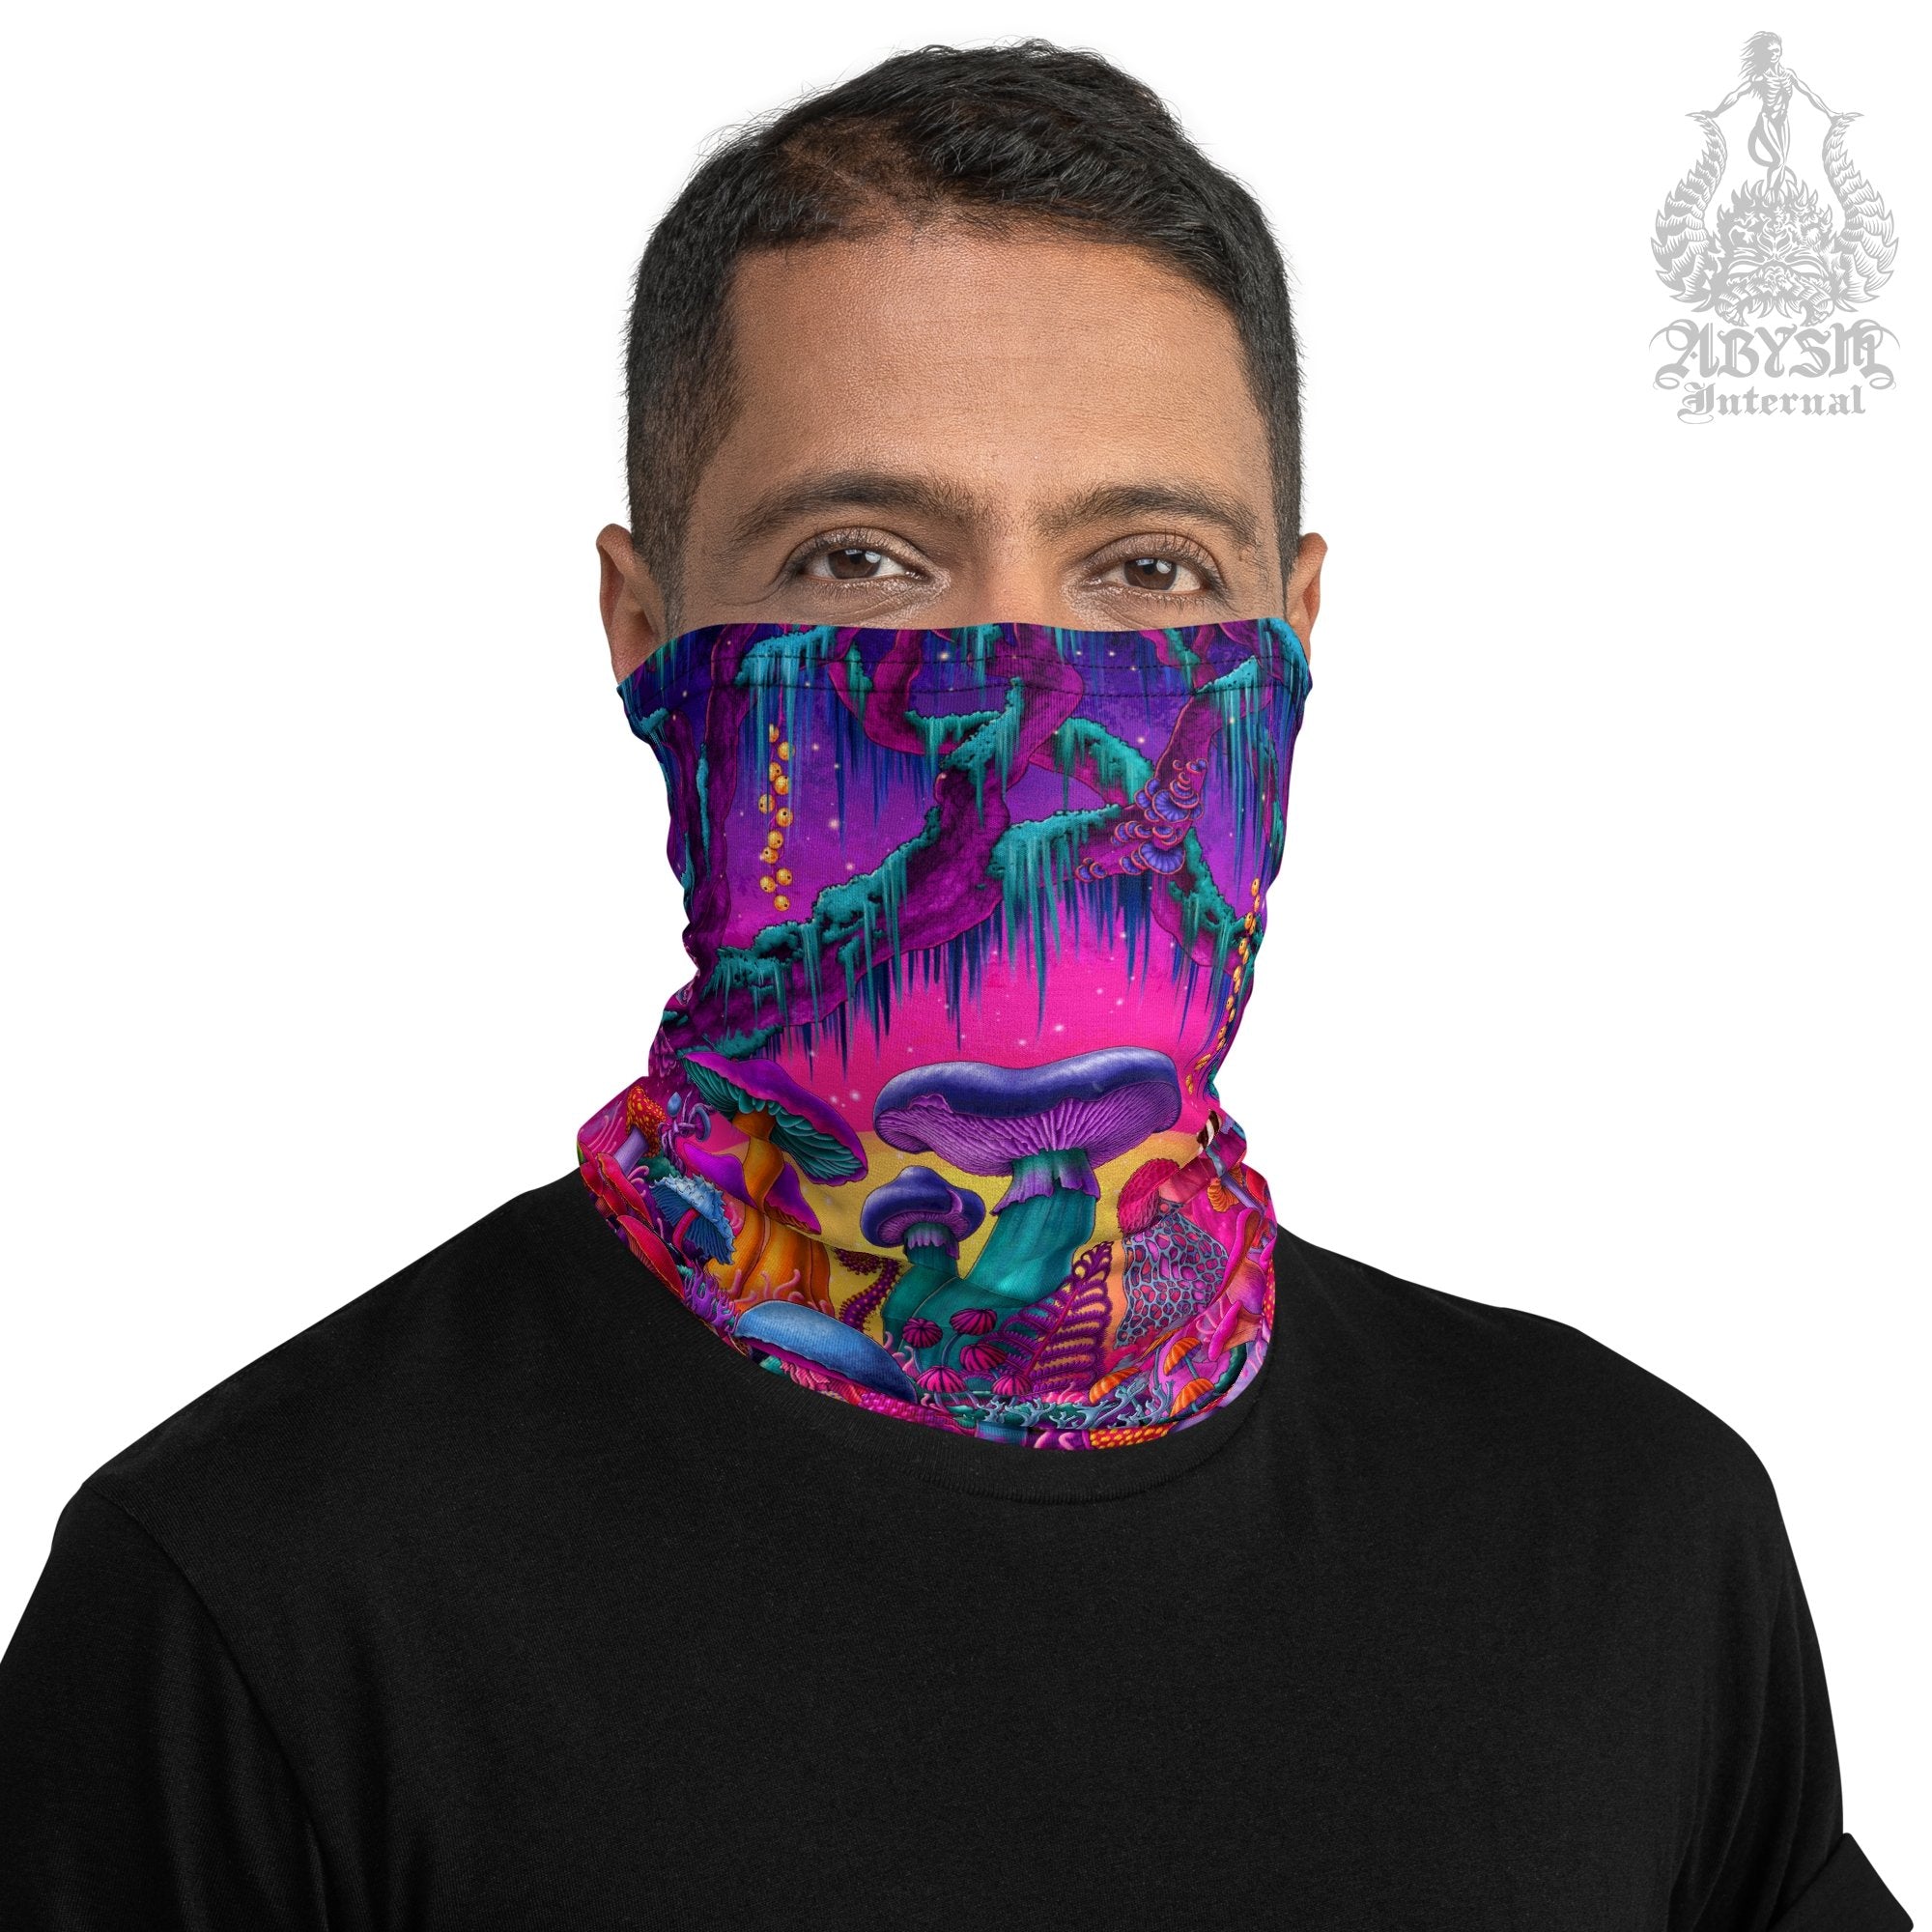 Magic Shrooms Neck Gaiter, Psychedelic Mushrooms Face Mask, Synthwave Head Covering, Vaporwave 80s Retrowave, Festival Outfit - Abysm Internal